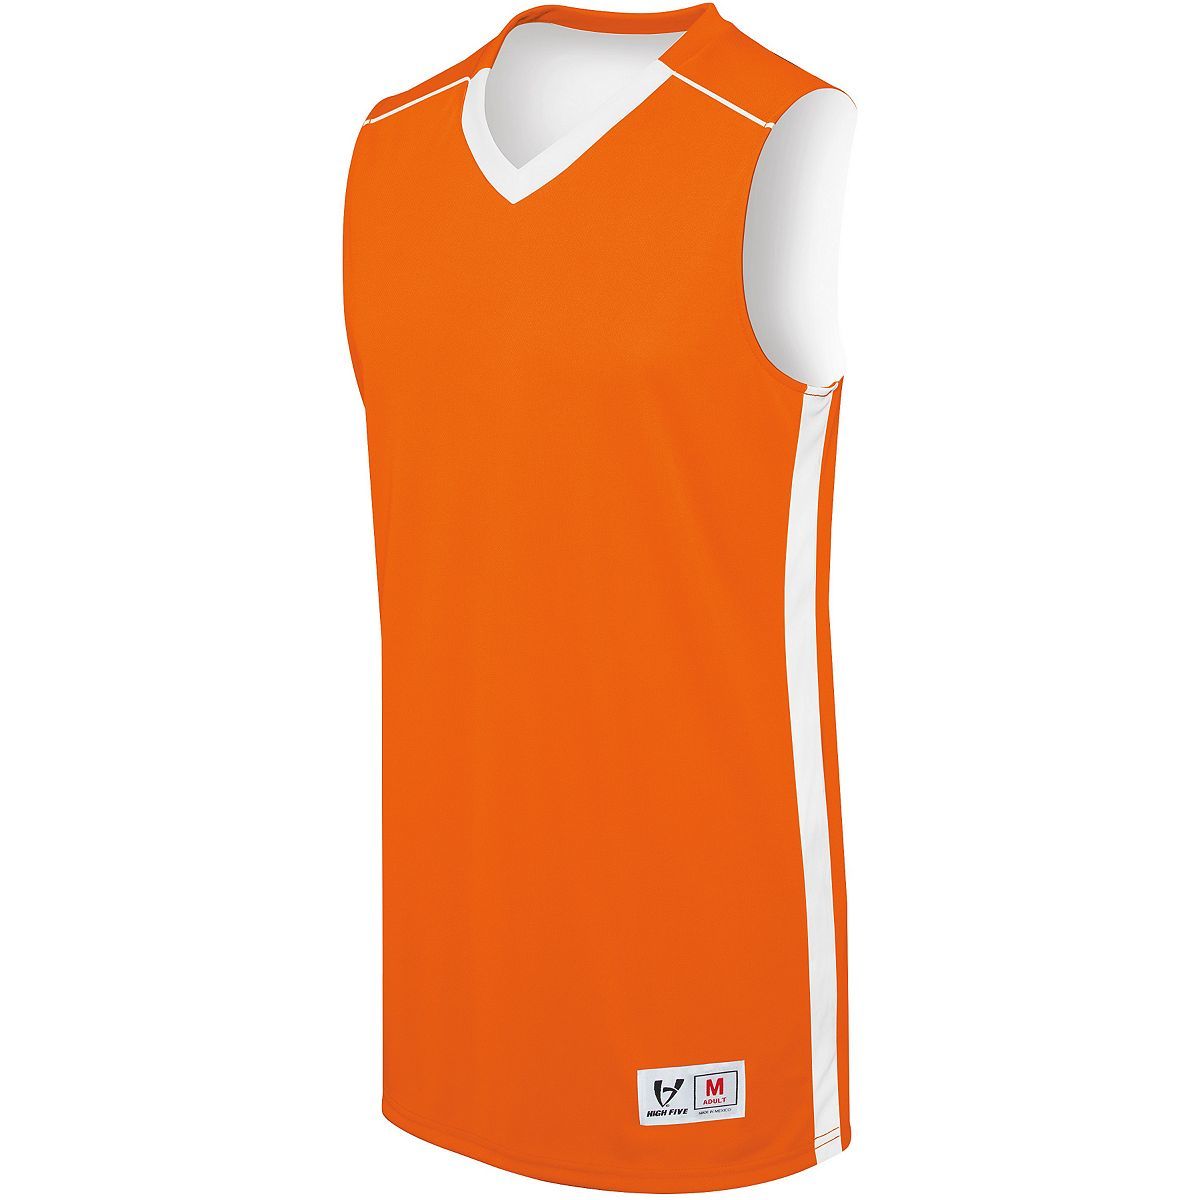 Augusta Sportswear Adult Competition Reversible Jersey in Orange/White  -Part of the Adult, Adult-Jersey, Augusta-Products, Basketball, Shirts, All-Sports, All-Sports-1 product lines at KanaleyCreations.com